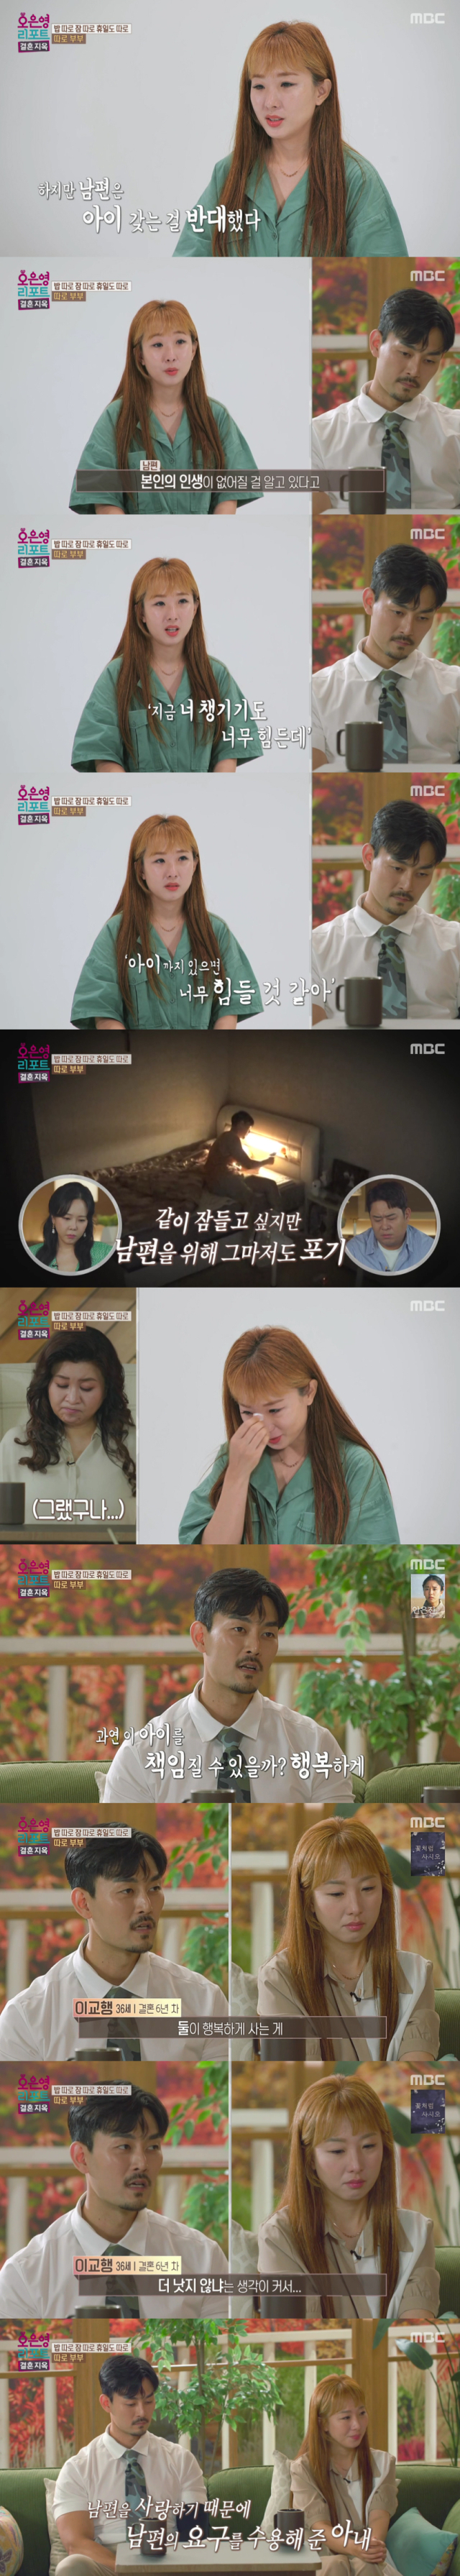 Lee Joo-ah, who runs gym together with bodybuilder Lee Kyo-haeng, who is the worlds No. 1 player in the world competition, has revealed his troubles with Couple.Lee Joo-ah Couple appeared on MBC Oh Eun Young The Report  ⁇  marriage Hell (hereinafter marriageHell) broadcast on the afternoon of the 23rd.Lee Joo-ah said in tears, I originally liked and wanted an iPad, but Husband objected to having an iPad. He said, Ive talked about that a lot. I know that if I have an iPad, my life will be lost.Its too hard to get one now, but its too hard to have an iPad. Lee Joo-ah said, Because Im a couple, sometimes I want to hug and sleep with Husband. So Im very upset that I cant sleep with him today. Thats why I gave up.Lee said, I think that if you have a child, you have to take responsibility anyway. I do not know honestly when you say, Can you take responsibility for this iPad when you see my situation now?I think its a contradiction to do with the iPad, but I think its better to be a little better with Wife and live happily together. Oh Eun Young asked Lee Joo-ah, If Husband continues to oppose having an iPad, is Wife okay? Lee Joo-ah said, Its okay.I can not help it ... he showed great affection for the affection.On the other hand, Oh Eun Young The Report Marriage Hell is National Mentor Oh Eun Young Doctorate, this time Couple solution!It is a real talk mentoring program that observes the daily life of the couples who have become worse than others, and they share their troubles with the couple by appearing directly in the studio.